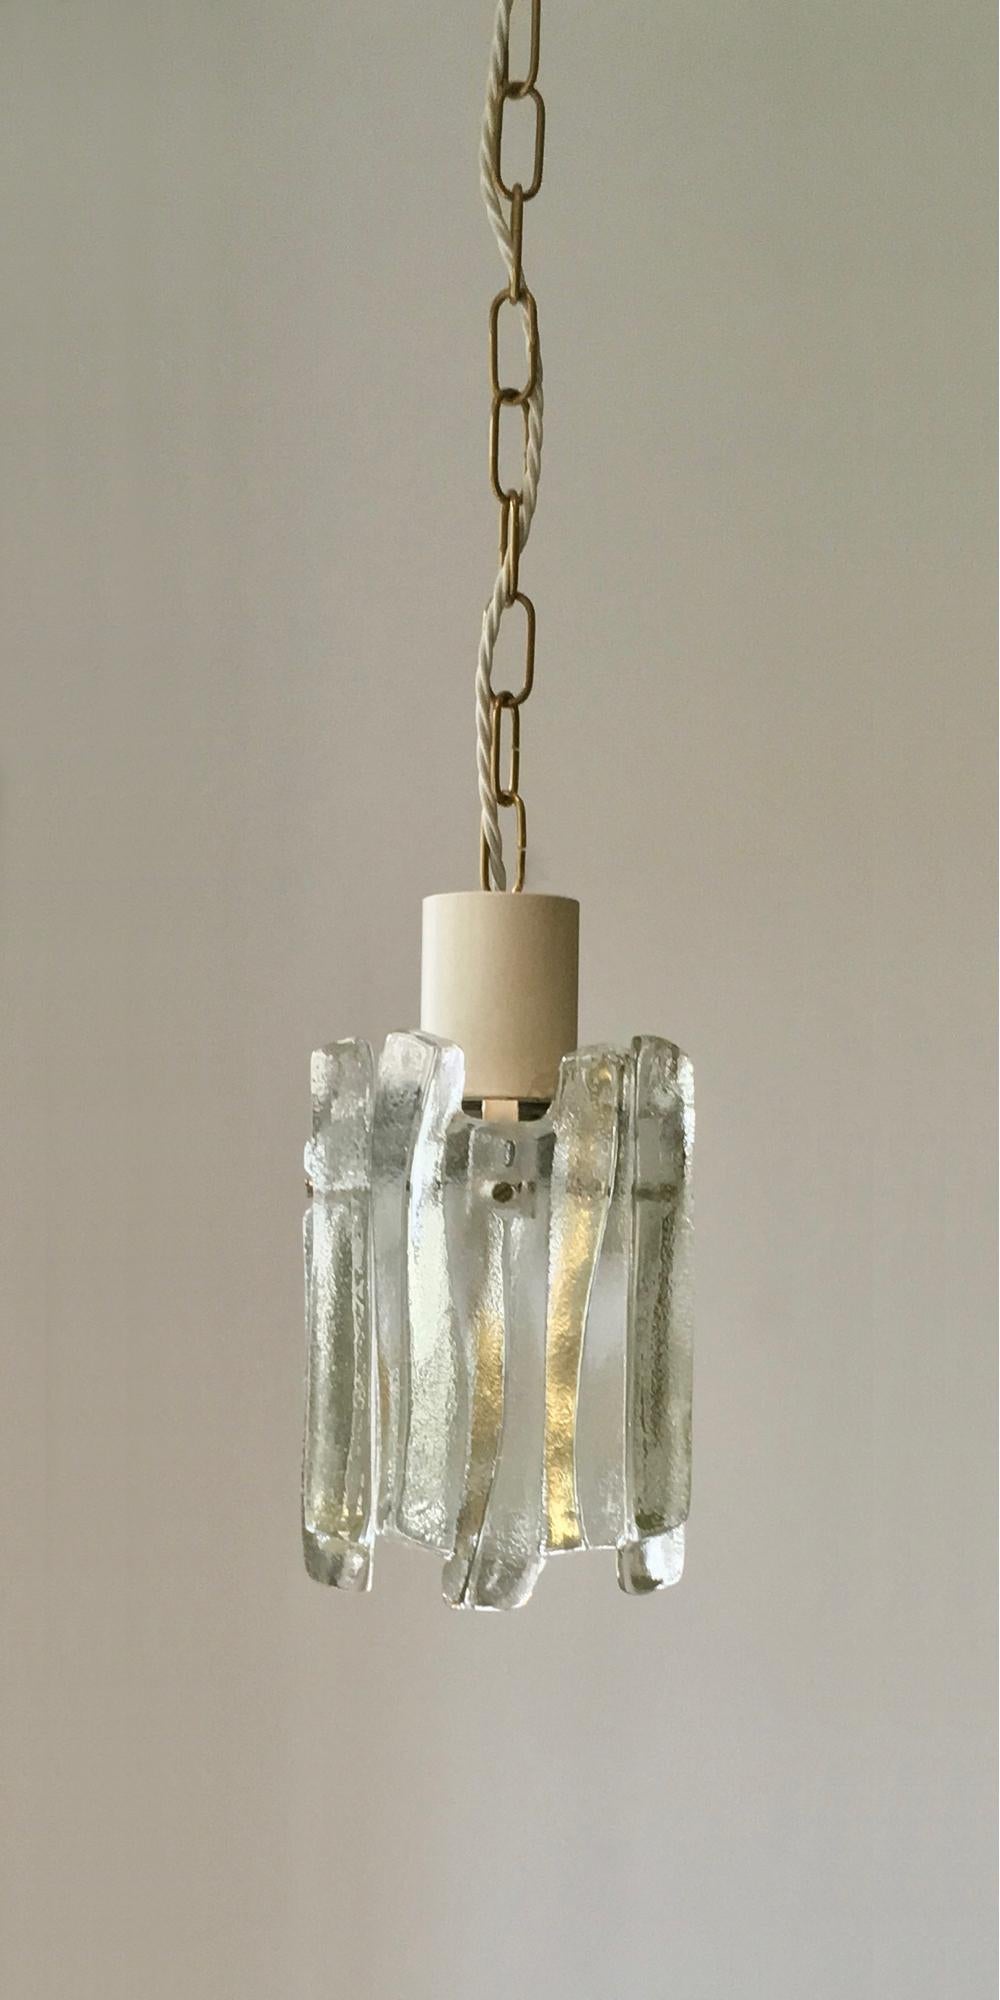 *** Please contact us if you would like details of availability of this item. ***

A pair of glass pendant lights by Kalmar of Austria, late 1960s or early 1970s design. Two pairs available; price per pair.

Simple but stylish lights giving a nice